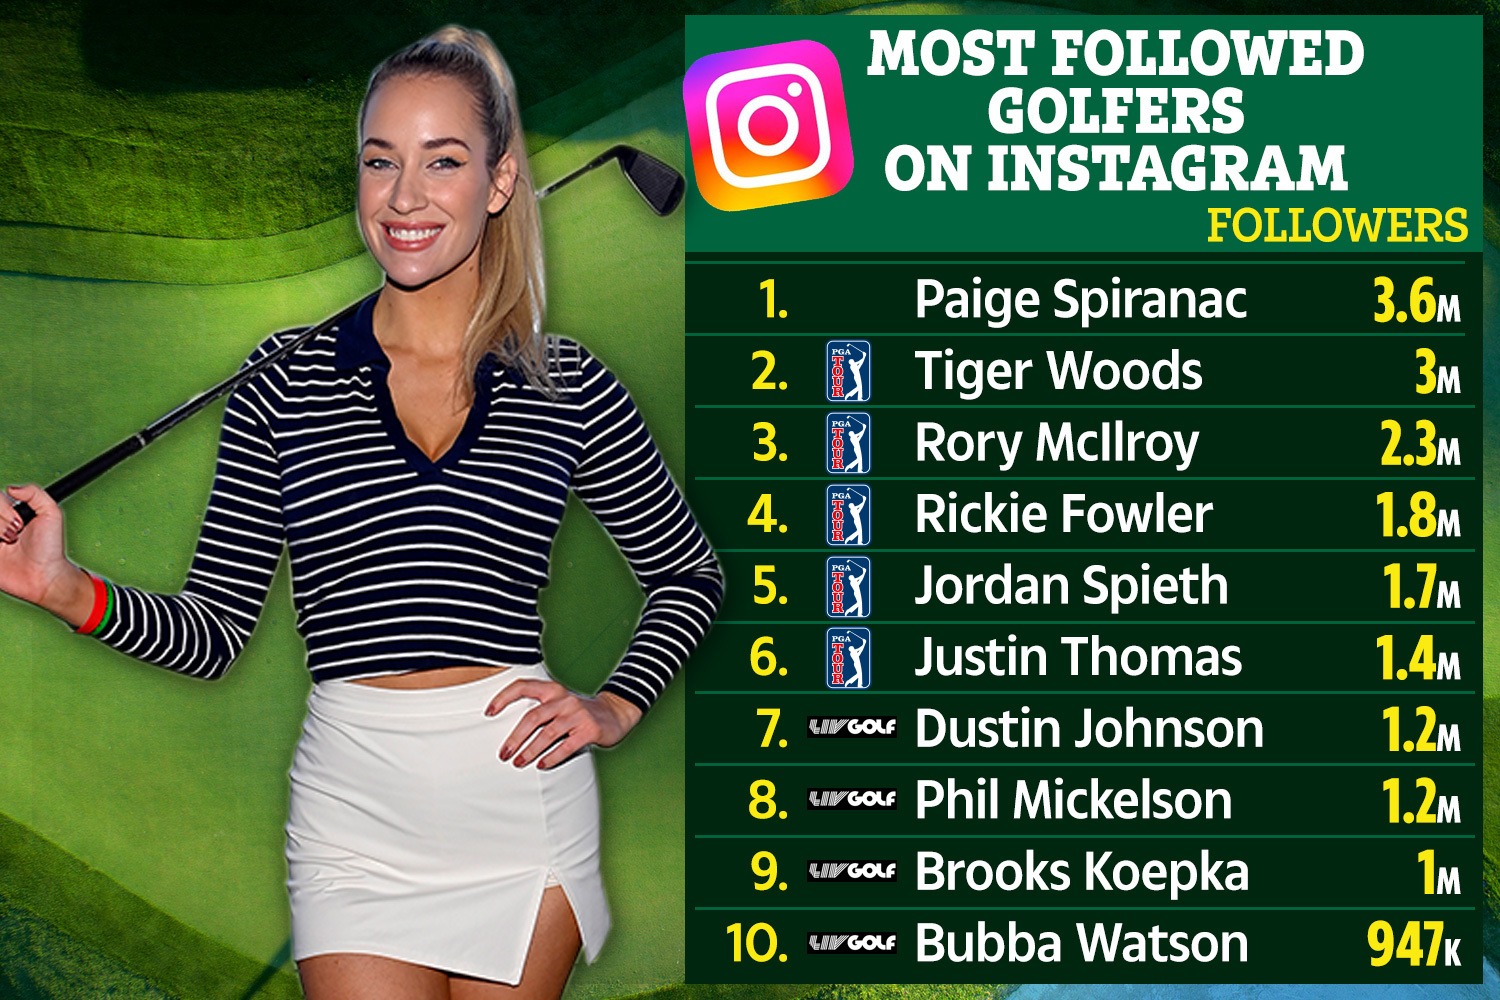 , ‘Men like golf and boobs’ – Paige Spiranac responds after top 10 most followed golfers on Instagram are revealed